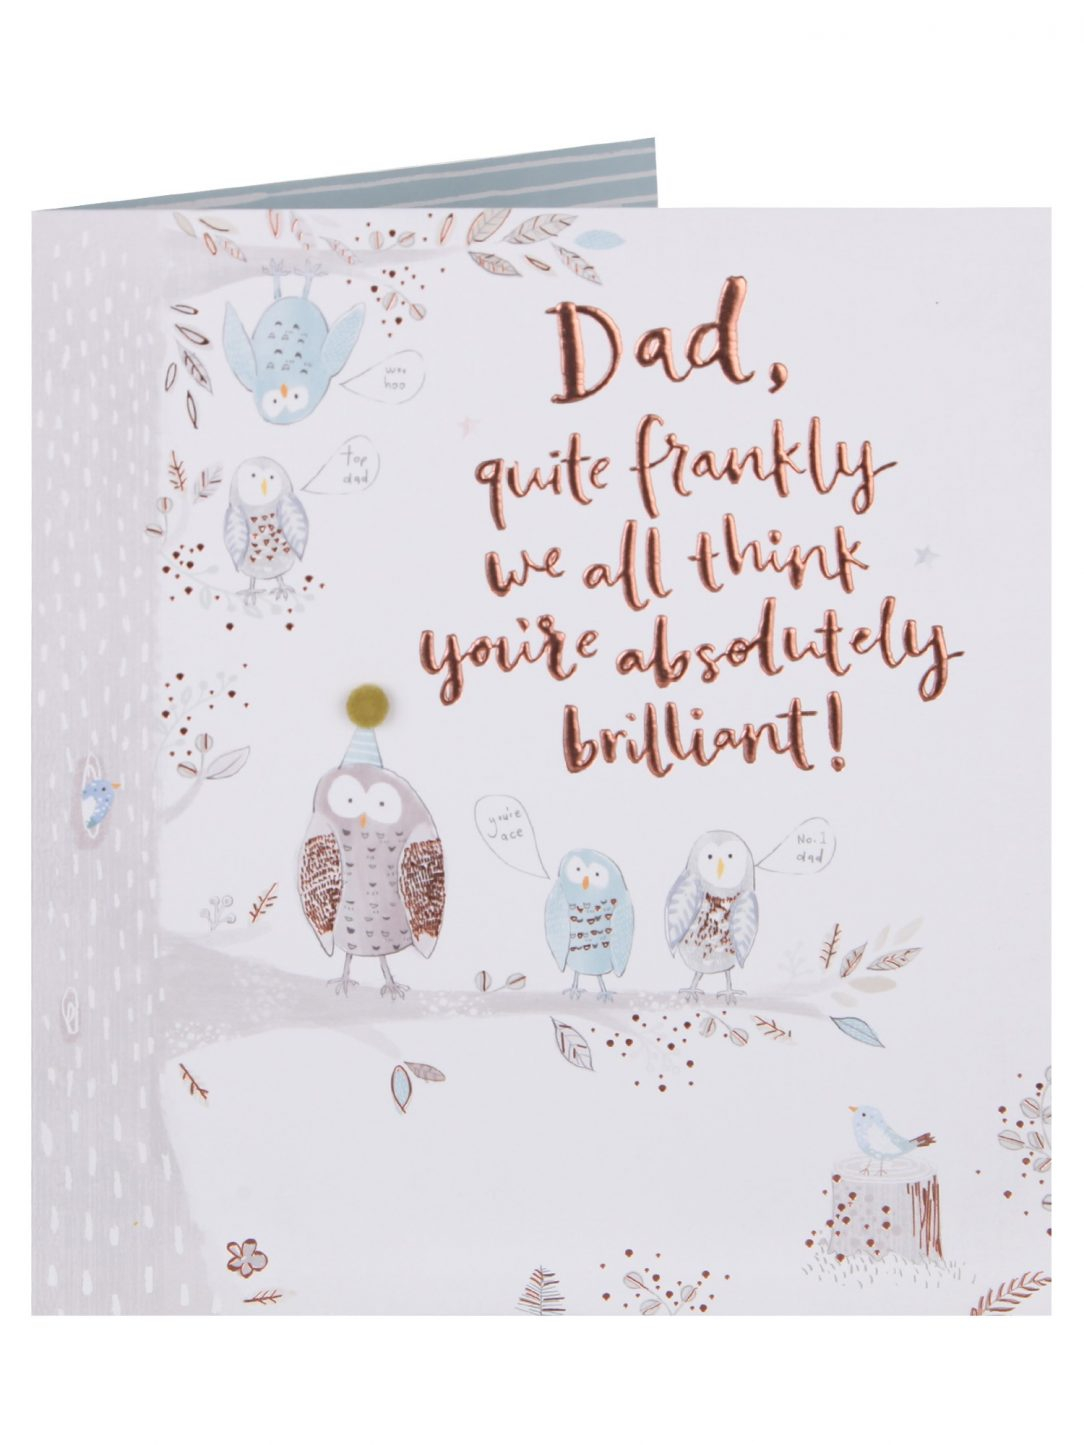 Good Card Ideas For Dads Birthday Good Birthday Card Ideas For Dad Creative Wording Text Message From